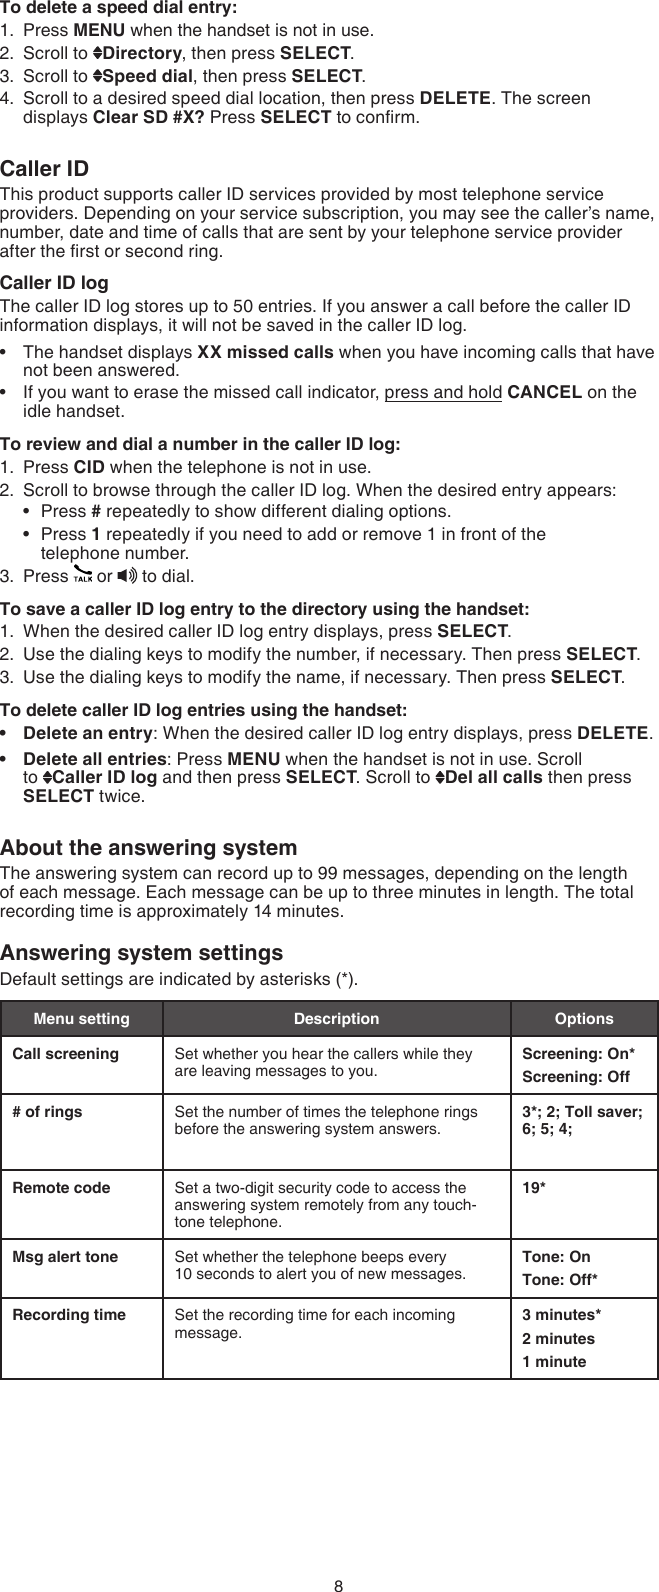 8To delete a speed dial entry:Press MENU when the handset is not in use.Scroll to  Directory, then press SELECT.Scroll to  Speed dial, then press SELECT.Scroll to a desired speed dial location, then press DELETE. The screen displays Clear SD #X? Press SELECT to conrm.Caller IDThis product supports caller ID services provided by most telephone service providers. Depending on your service subscription, you may see the caller’s name, number, date and time of calls that are sent by your telephone service provider after the rst or second ring.Caller ID logThe caller ID log stores up to 50 entries. If you answer a call before the caller ID information displays, it will not be saved in the caller ID log.The handset displays XX missed calls when you have incoming calls that have not been answered.If you want to erase the missed call indicator, press and hold CANCEL on the idle handset.To review and dial a number in the caller ID log:Press CID when the telephone is not in use.Scroll to browse through the caller ID log. When the desired entry appears:Press # repeatedly to show different dialing options.Press 1 repeatedly if you need to add or remove 1 in front of the  telephone number.Press   or   to dial.To save a caller ID log entry to the directory using the handset:When the desired caller ID log entry displays, press SELECT.Use the dialing keys to modify the number, if necessary. Then press SELECT.Use the dialing keys to modify the name, if necessary. Then press SELECT.To delete caller ID log entries using the handset:Delete an entry: When the desired caller ID log entry displays, press DELETE.Delete all entries: Press MENU when the handset is not in use. Scroll  to  Caller ID log and then press SELECT. Scroll to  Del all calls then press  SELECT twice.About the answering systemThe answering system can record up to 99 messages, depending on the length of each message. Each message can be up to three minutes in length. The total recording time is approximately 14 minutes.Answering system settings Default settings are indicated by asterisks (*).Menu setting Description OptionsCall screening Set whether you hear the callers while they are leaving messages to you.Screening: On*Screening: Off# of rings Set the number of times the telephone rings before the answering system answers. 3*; 2; Toll saver; 6; 5; 4; Remote code Set a two-digit security code to access the answering system remotely from any touch-tone telephone.19*Msg alert tone Set whether the telephone beeps every         10 seconds to alert you of new messages.Tone: OnTone: Off*Recording time Set the recording time for each incoming message.3 minutes*2 minutes1 minute1.2.3.4.••1.2.••3.1.2.3.••